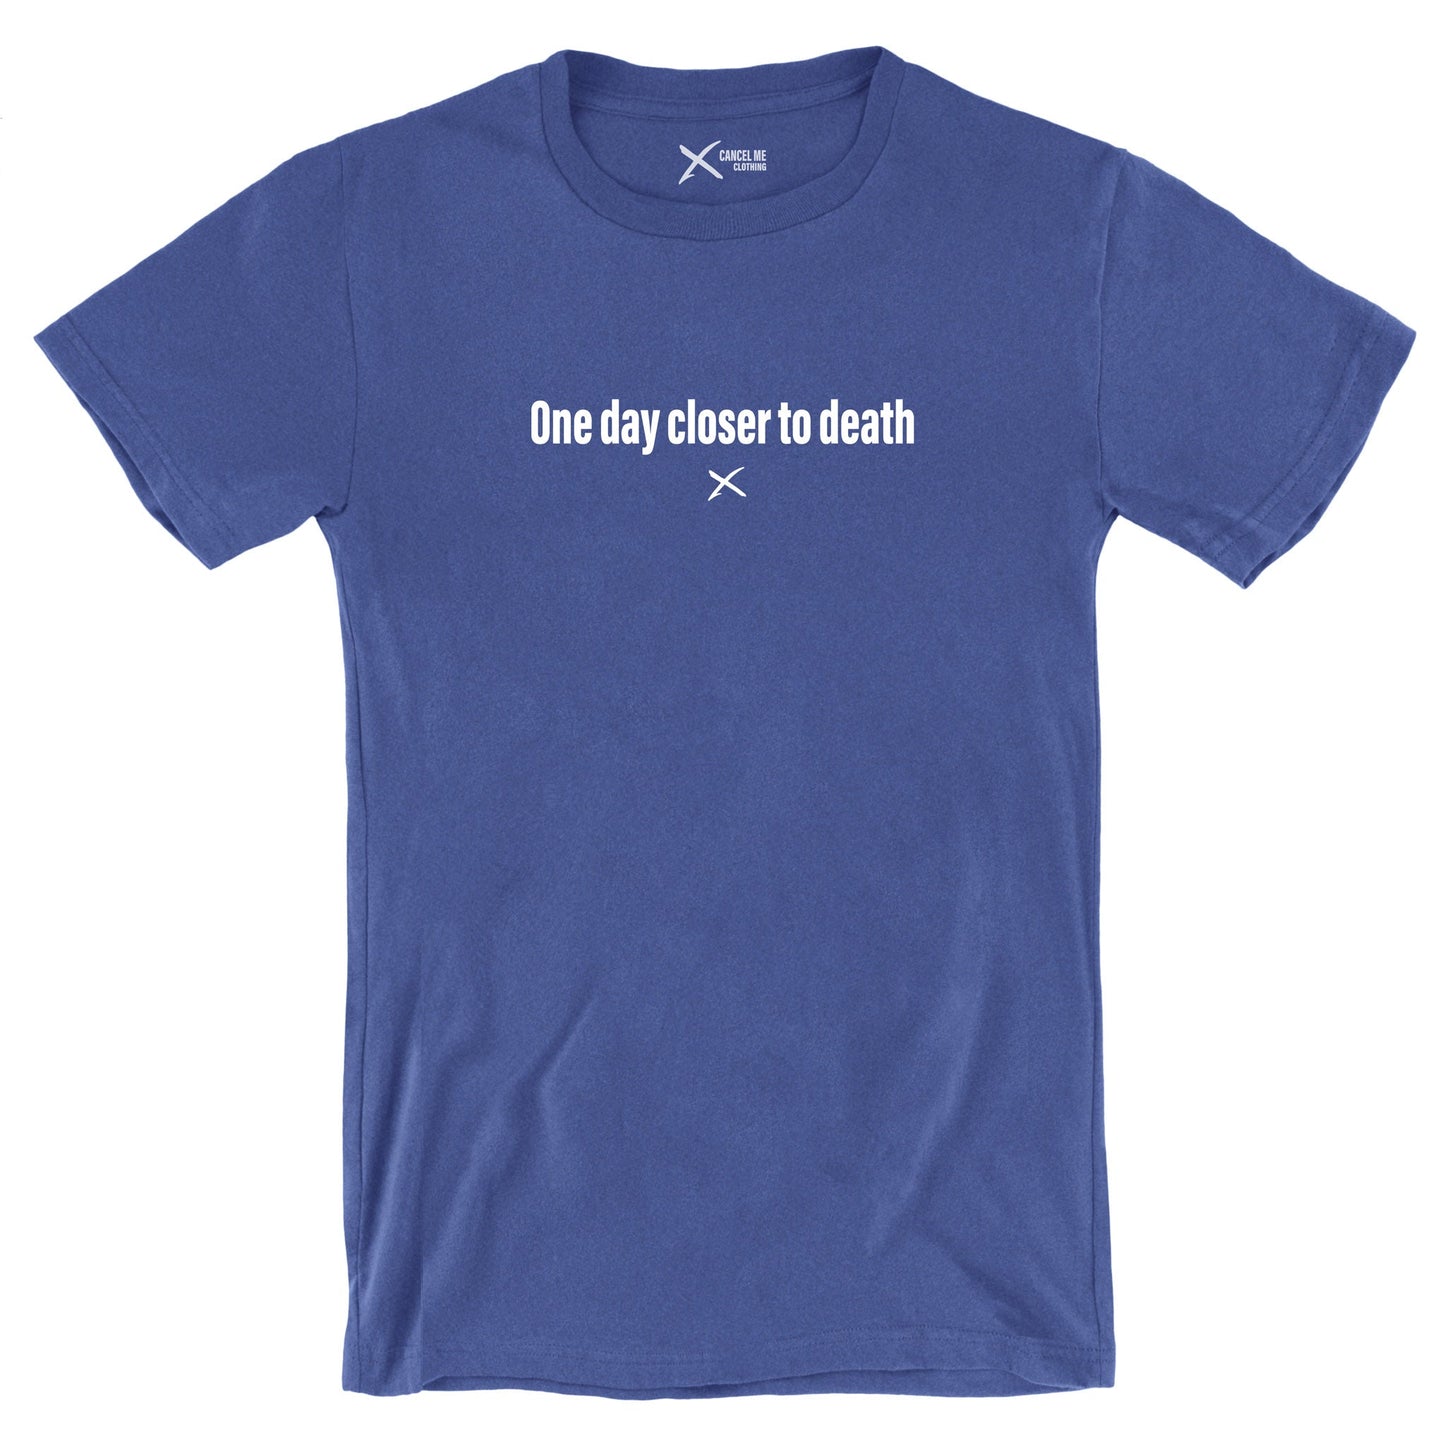 One day closer to death - Shirt